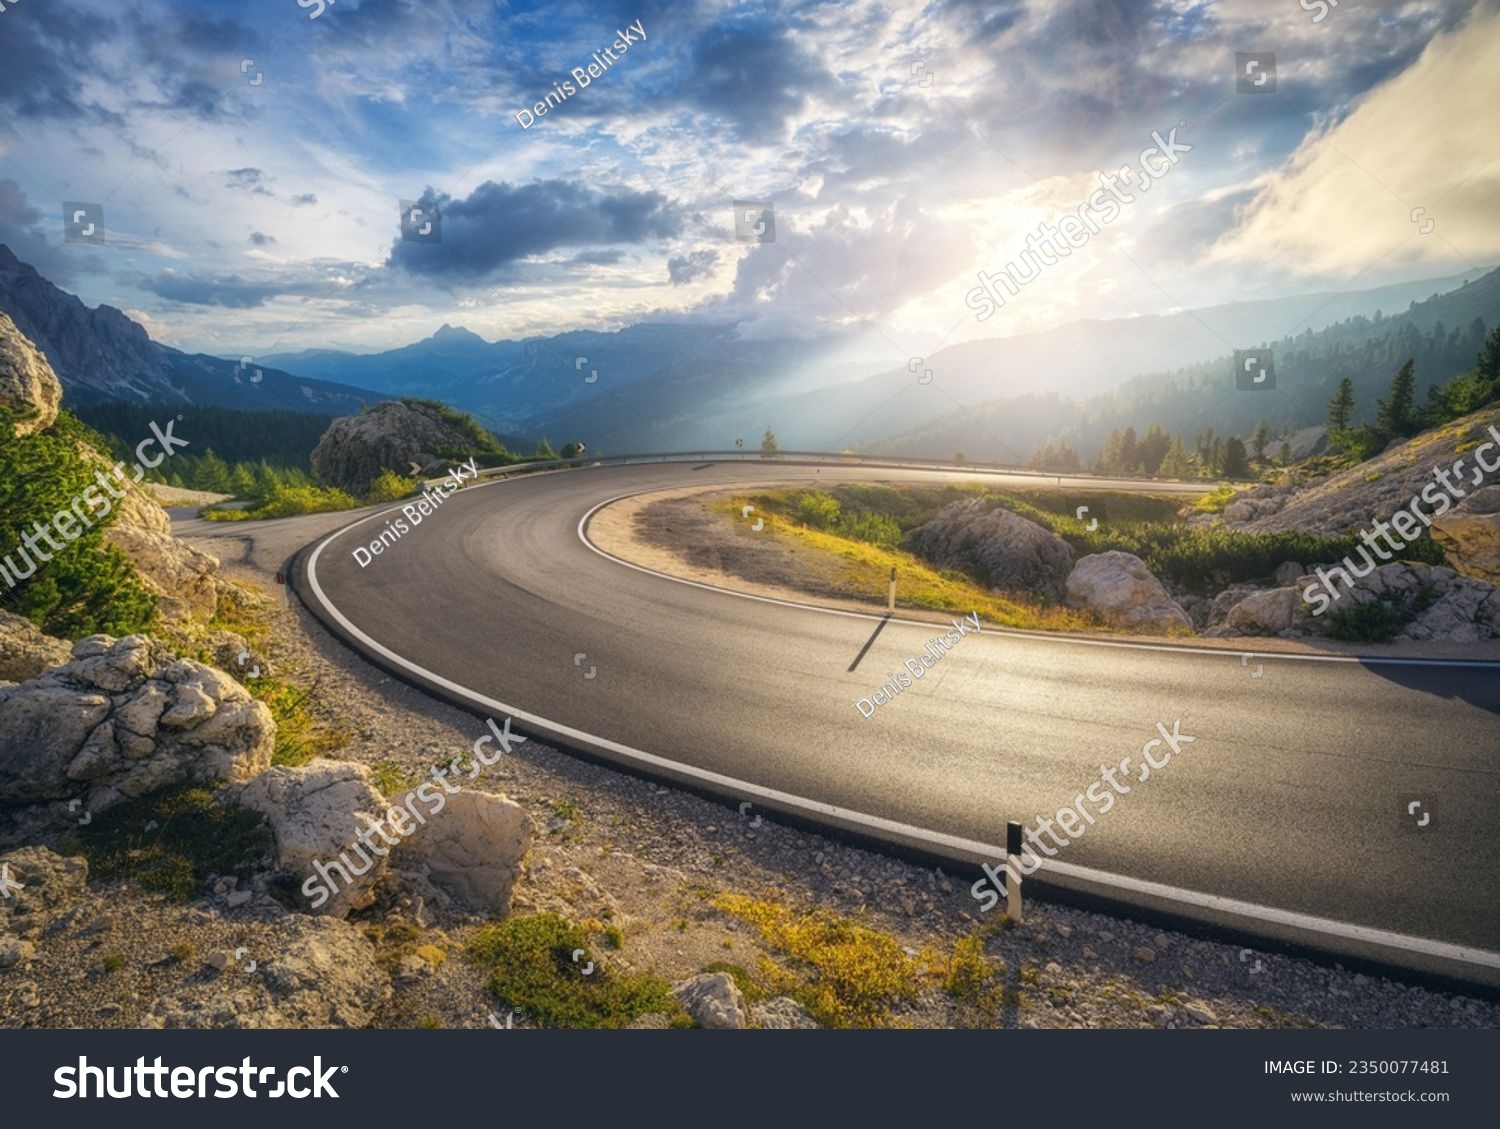 Mountain road at colorful sunset in summer. Dolomites, Italy. Beautiful curved roadway, rocks, stones, blue sky with clouds. Landscape with empty highway through the mountain pass in spring. Travel #2350077481